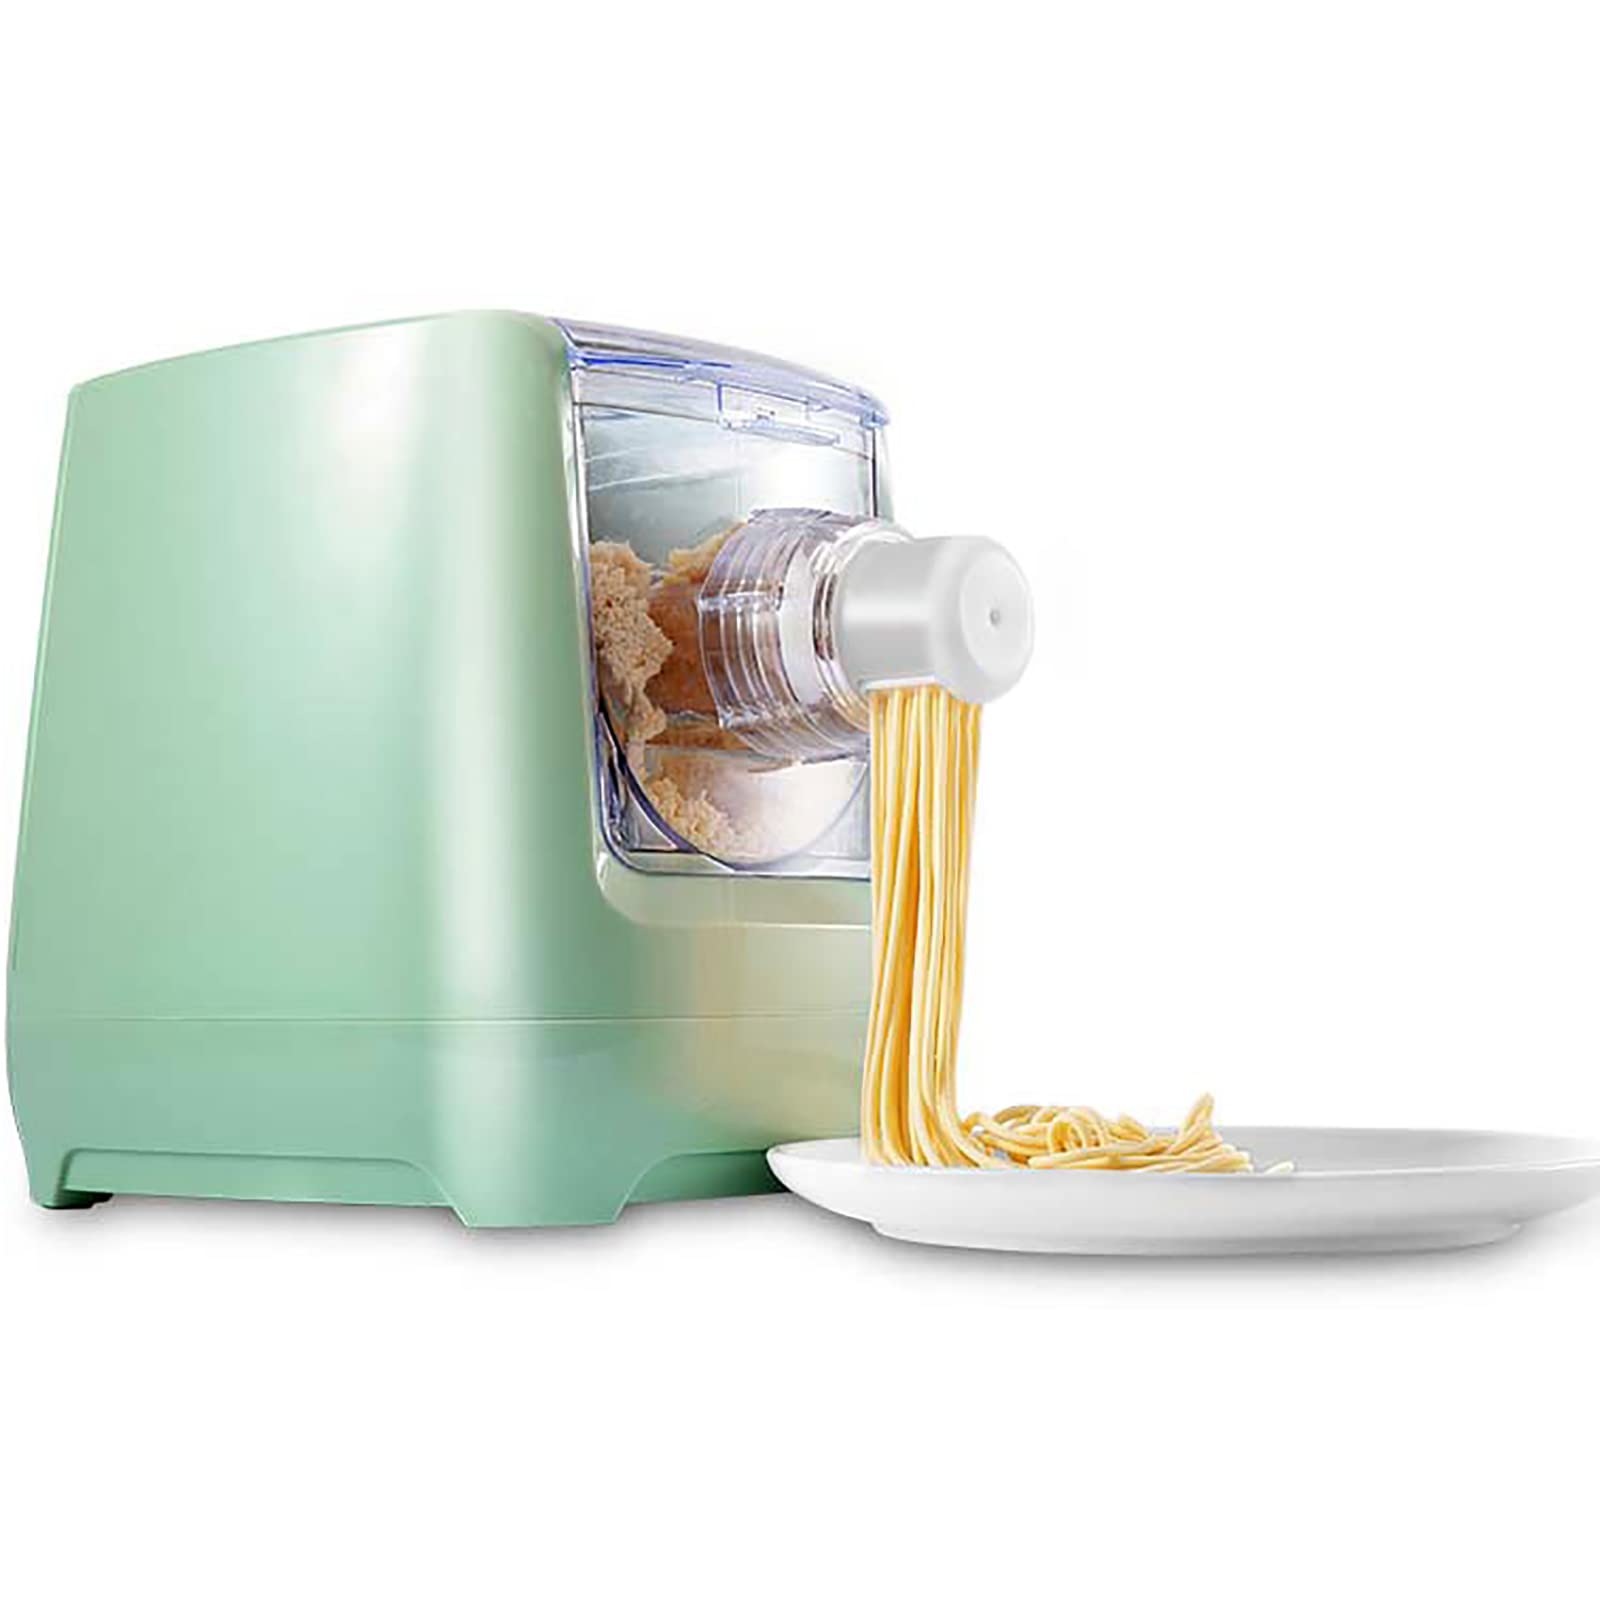 Electric Pasta Machine Automatic Noodle Maker Includes 13 Molds for Different Shapes, Make in 15 Minutes Kitchen Appliances - Fresh Noodle Machine - 7